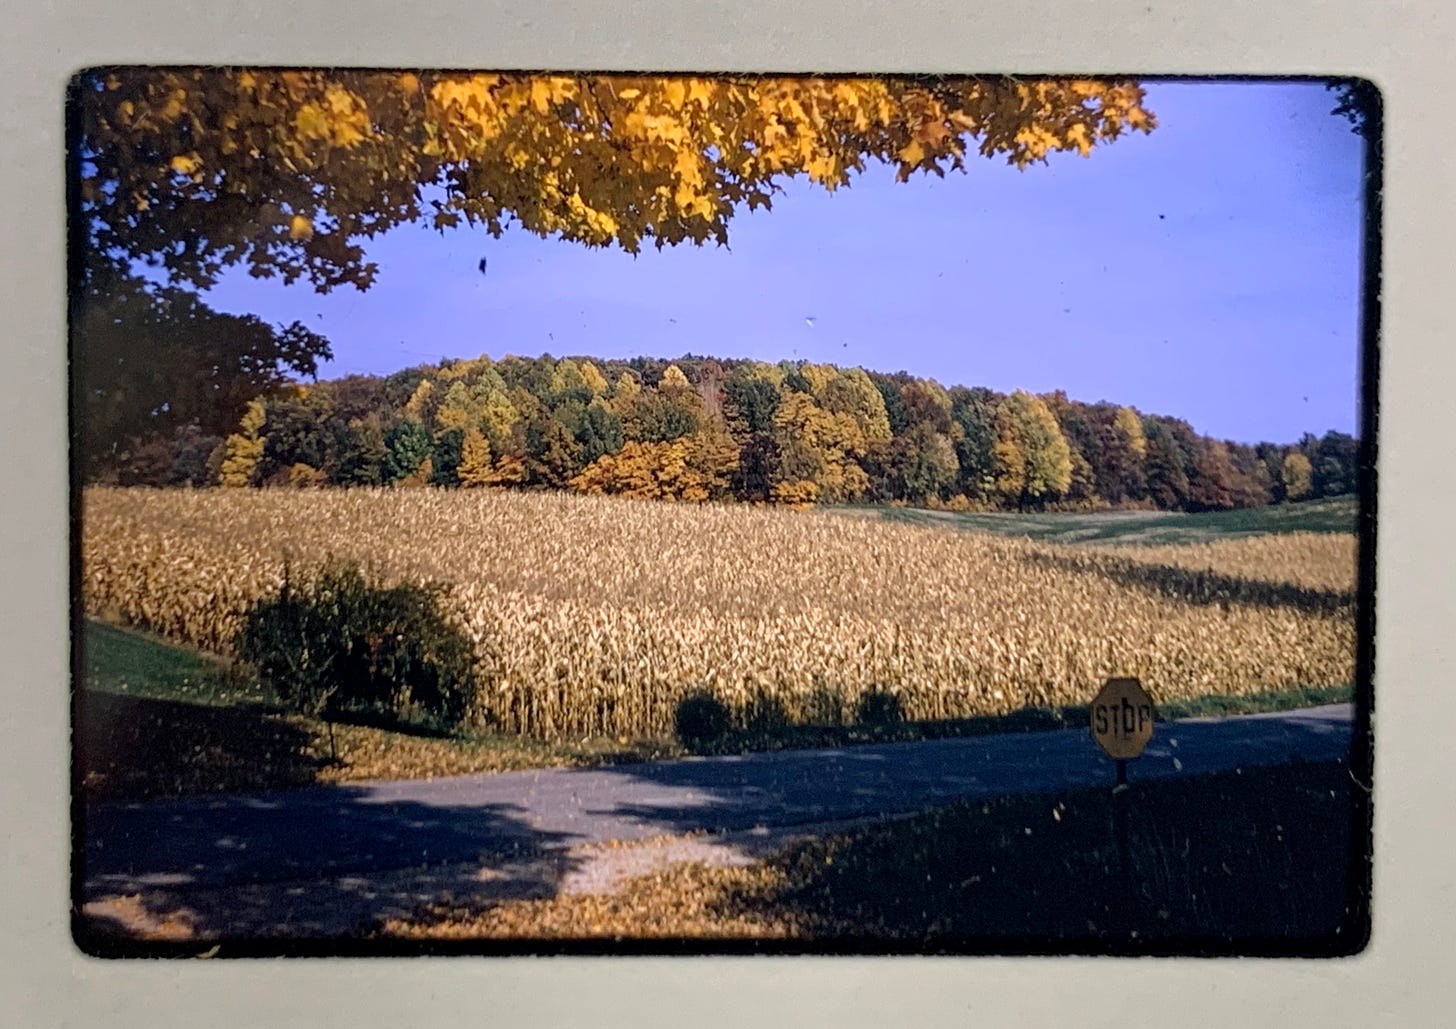 A field of dry brown corn plants next to a paved road, with fall color trees in the distance.